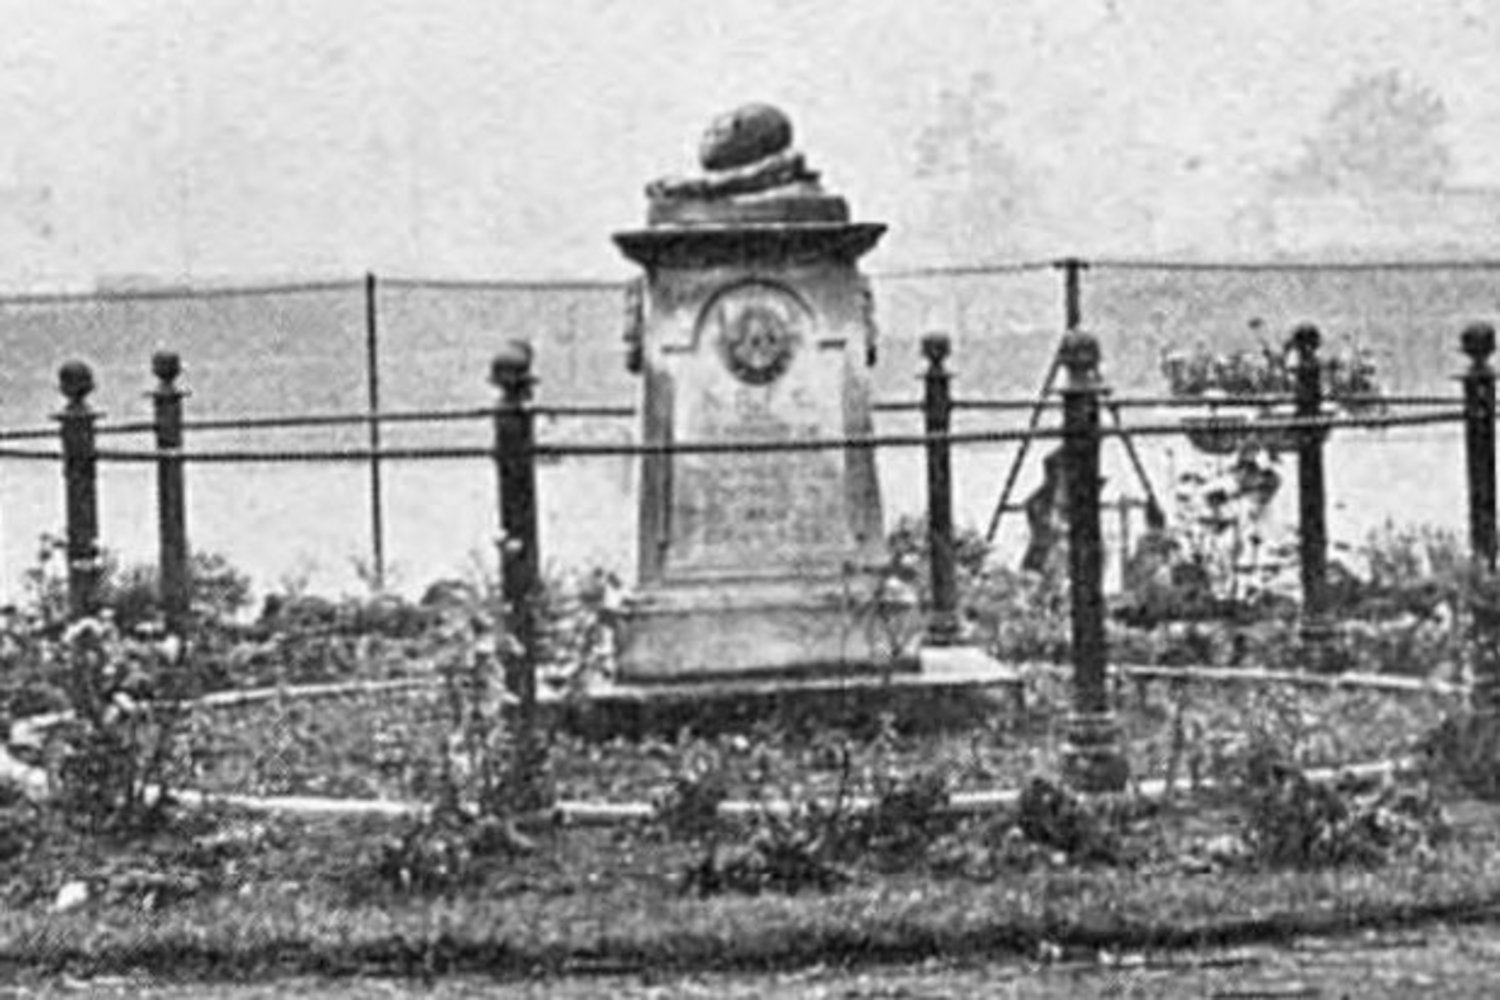 The War Memorial has stood at Franklin’s Gardens since 1922